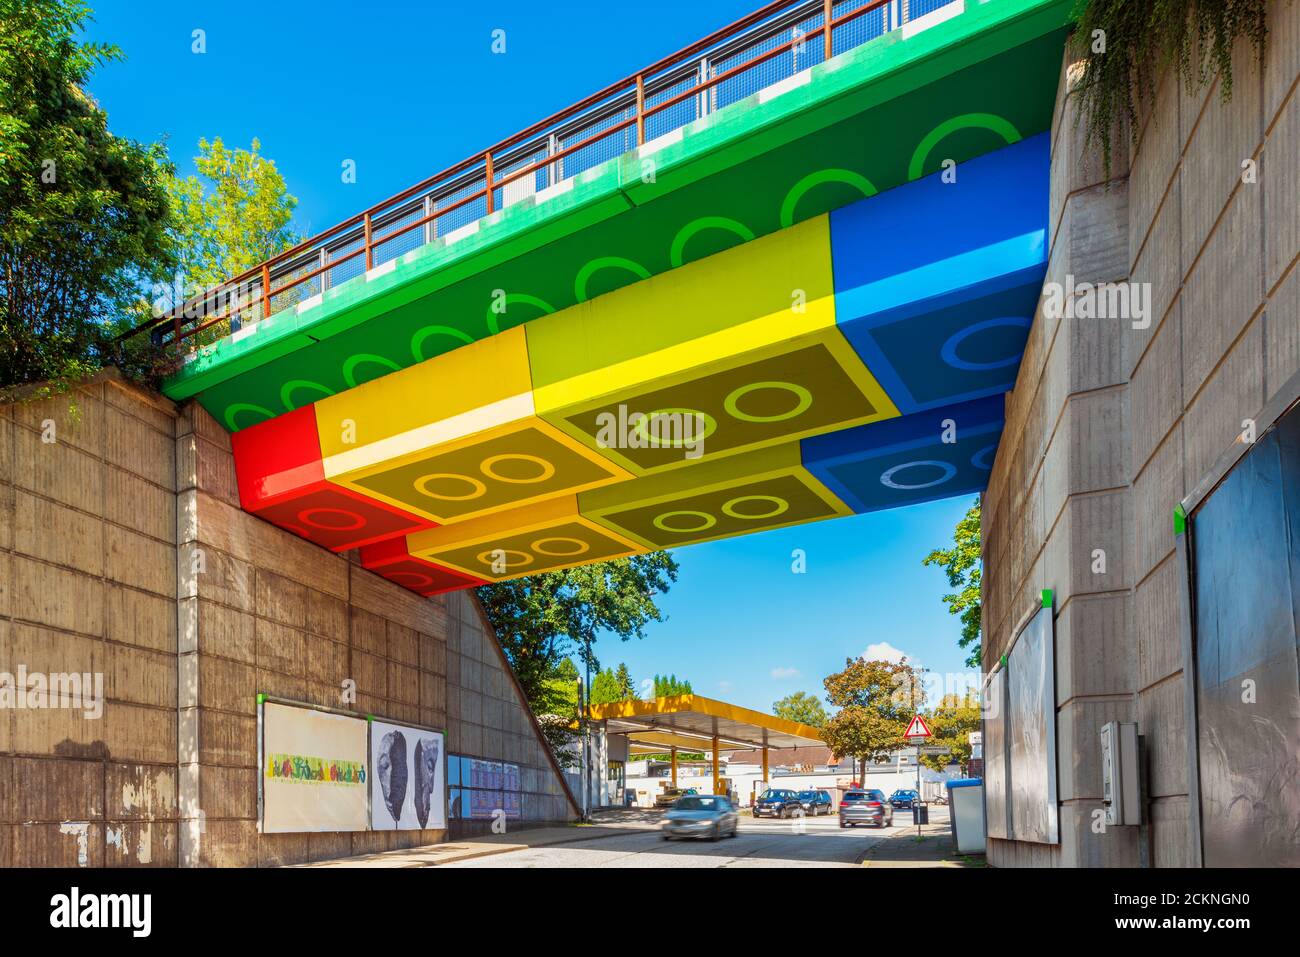 The Lego Bridge in Wuppertal, Germany. In 2011, graffiti and street artist Martin Heuwold repainted the bridge in Lego brick style. Stock Photo